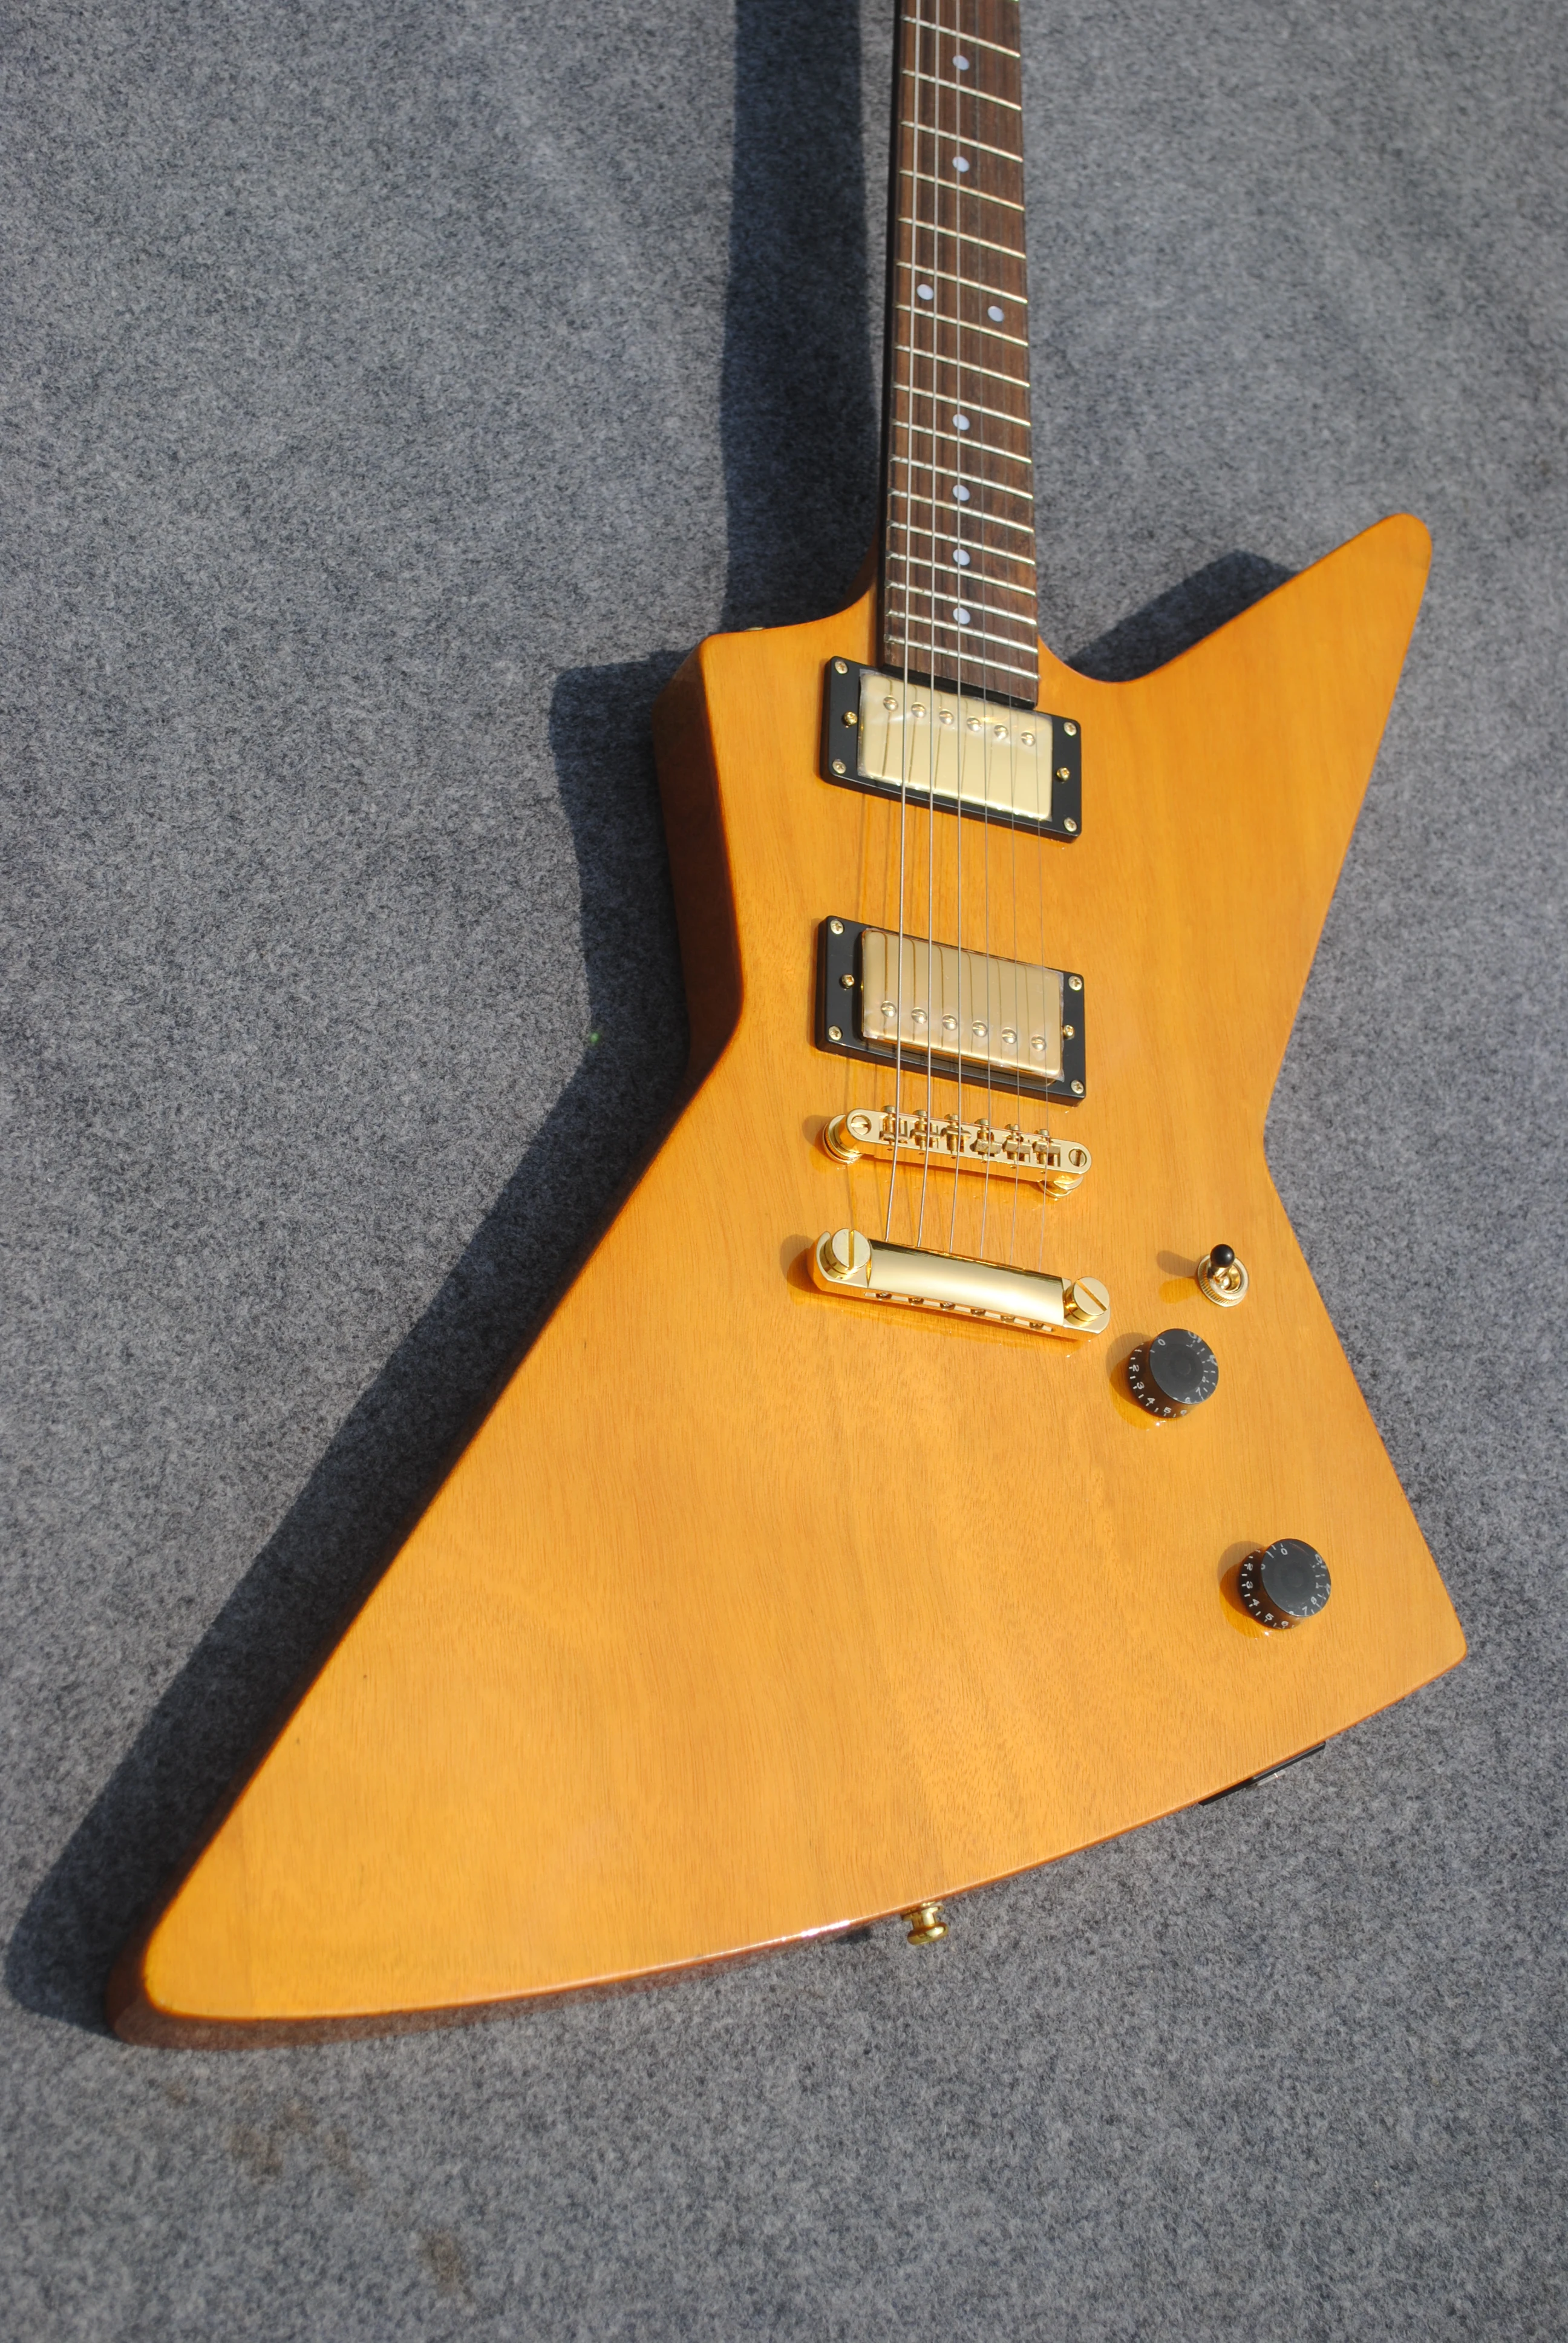 Oem 6 String Explore Electric Guitar,Gold Hardware , Free Delivery